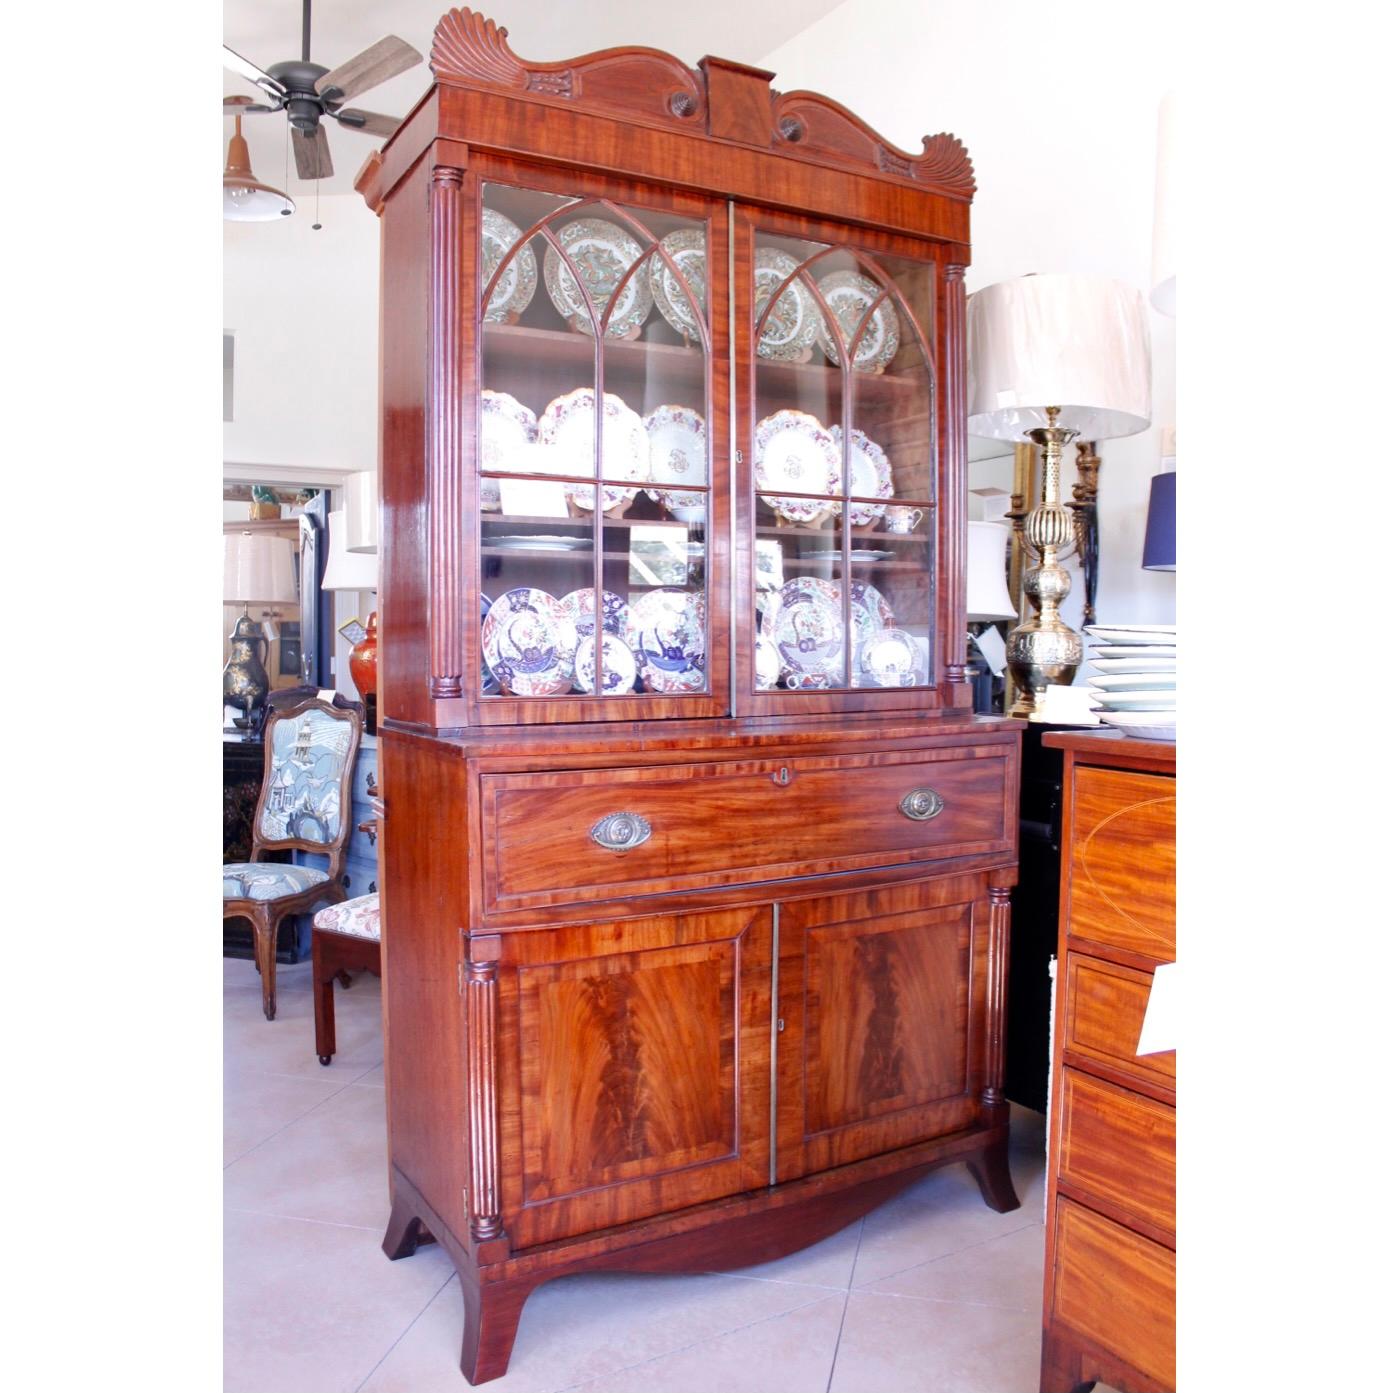 A stylish English mahogany William IV period piece, (ca. 1830), with a strikingly arched cornice terminating in half palmettes. Arched tracery distinguishes the glass doors of the top display cabinet, and the interior of the cabinet below is fitted